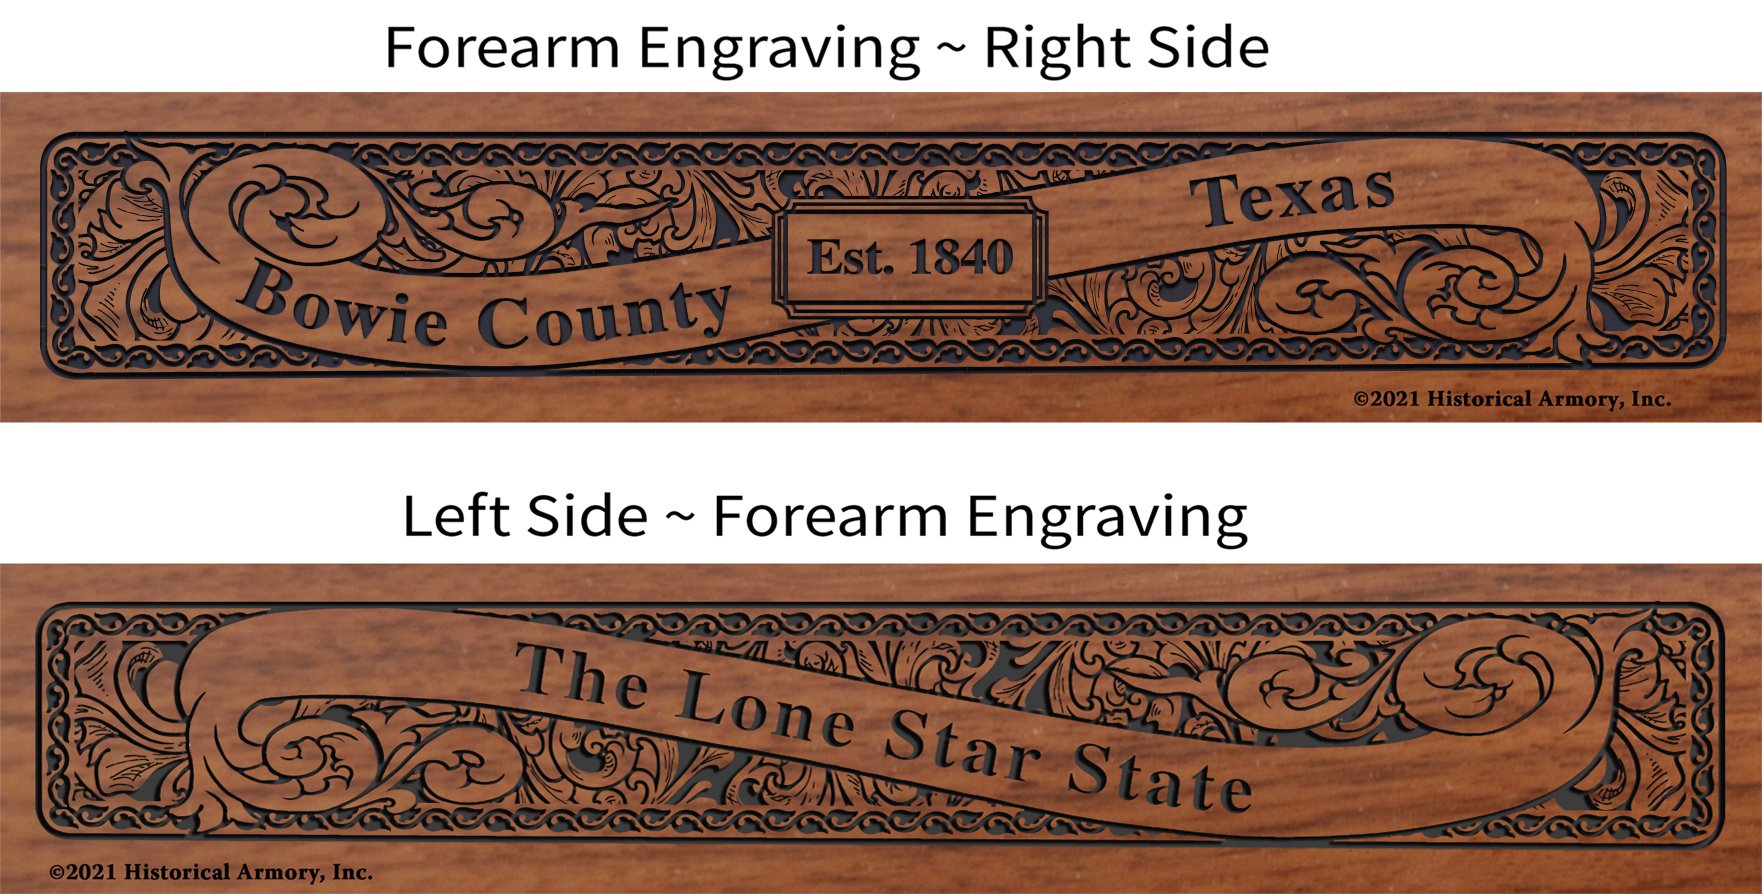 Bowie County Texas Establishment and Motto History Engraved Rifle Forearm